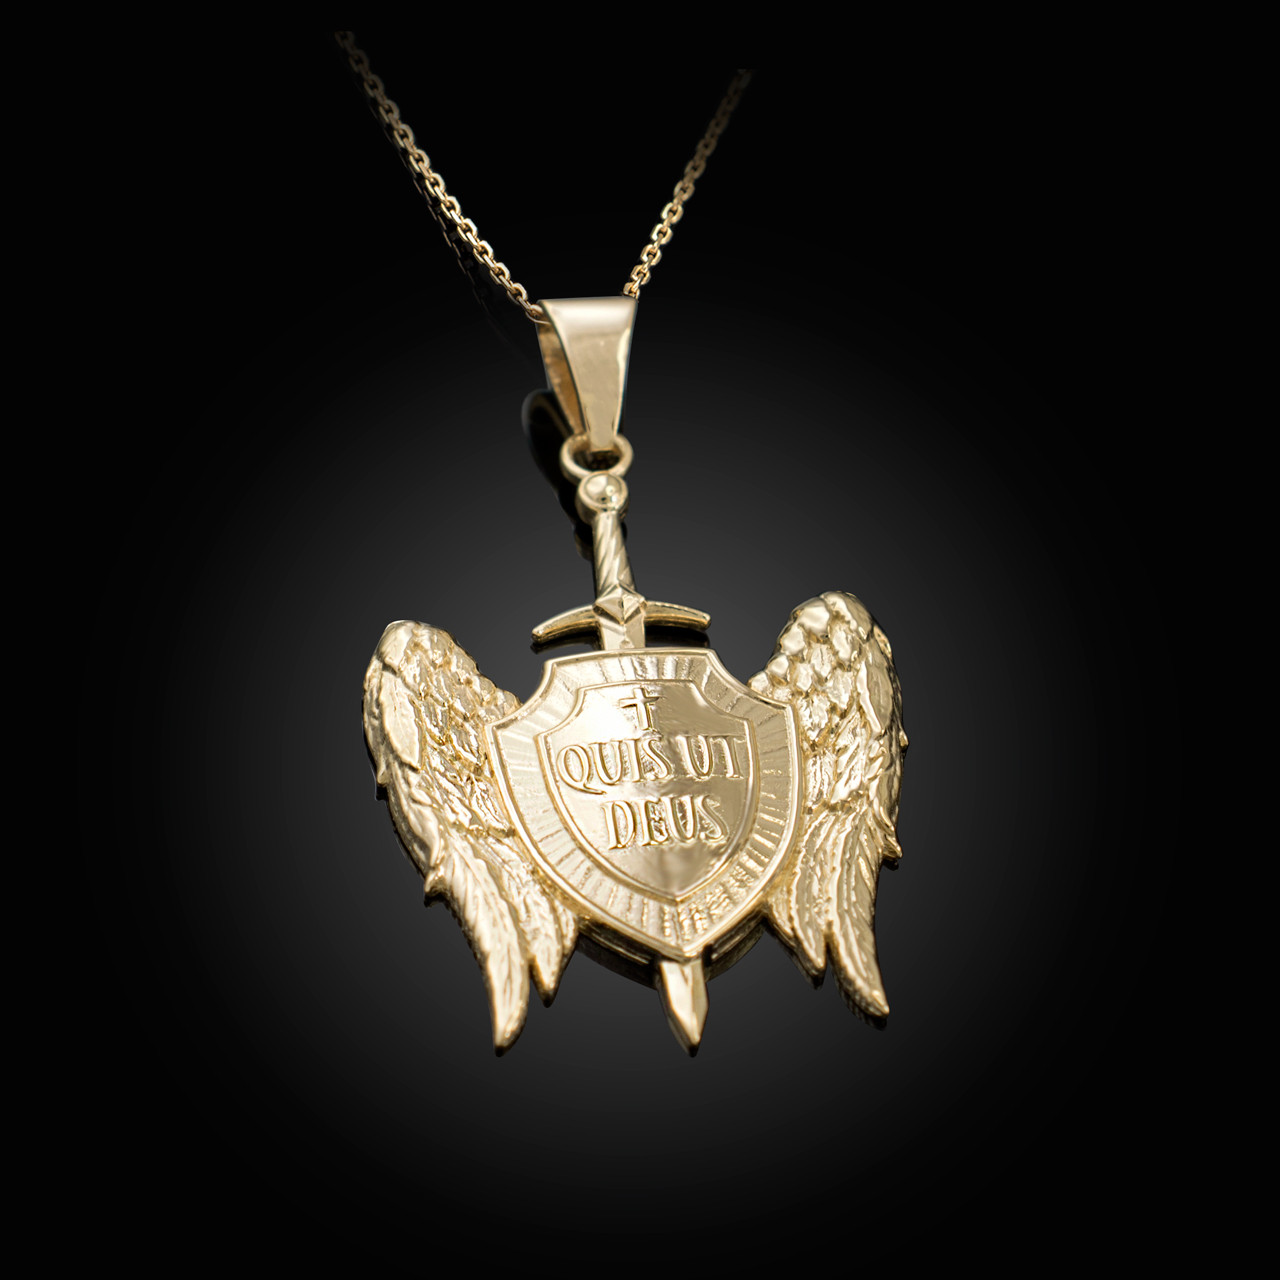 Underline I will be strong Sister Gold 3D Saint Michael Sword and Shield "Quis ut Deus" Pendant Necklace